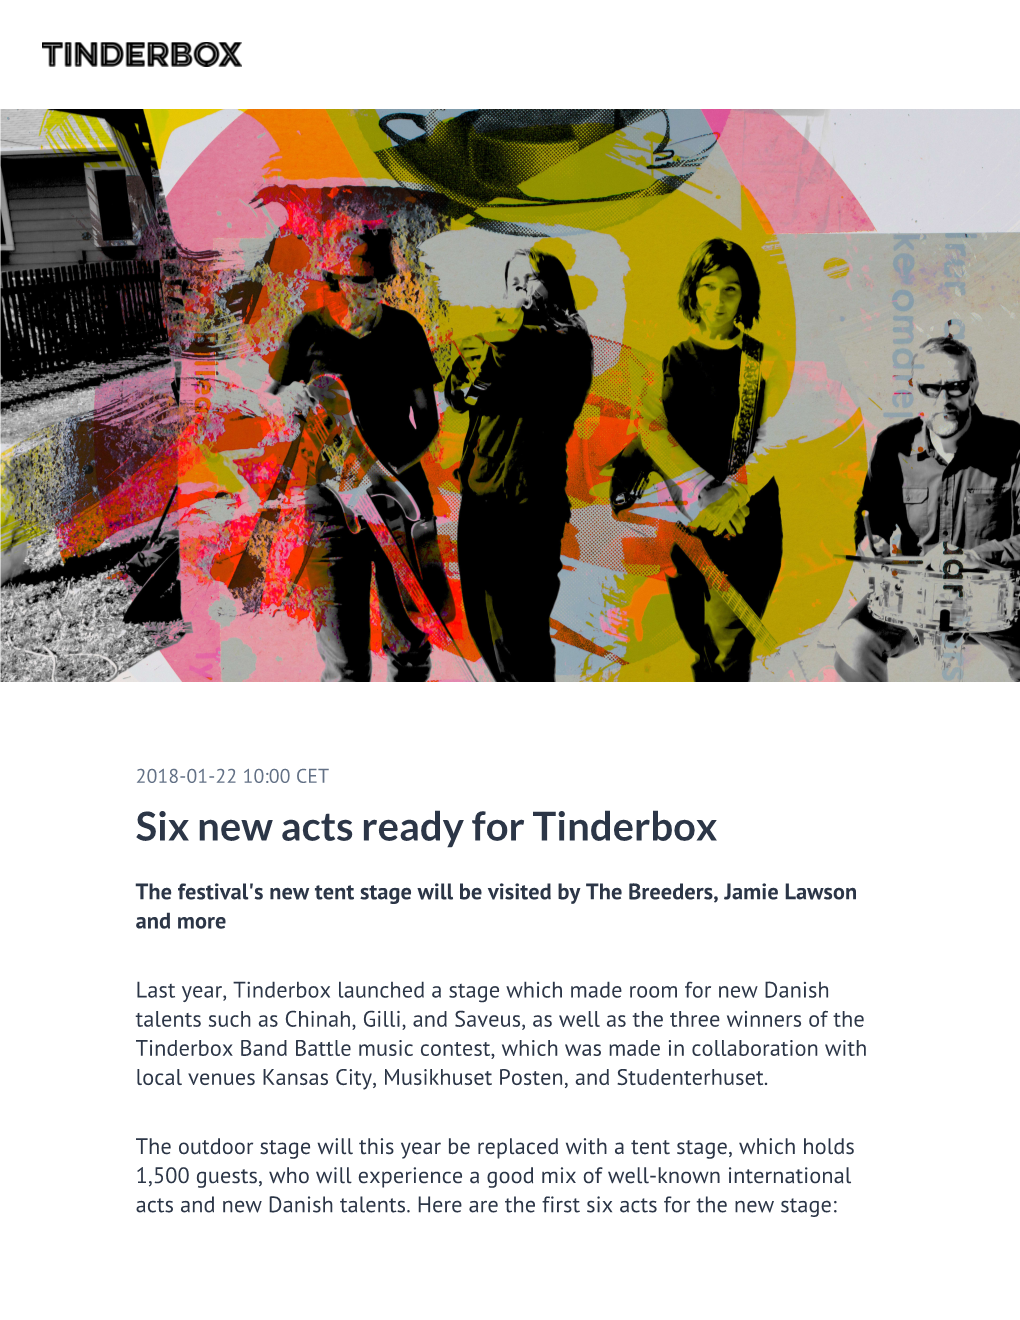 ​Six New Acts Ready for Tinderbox